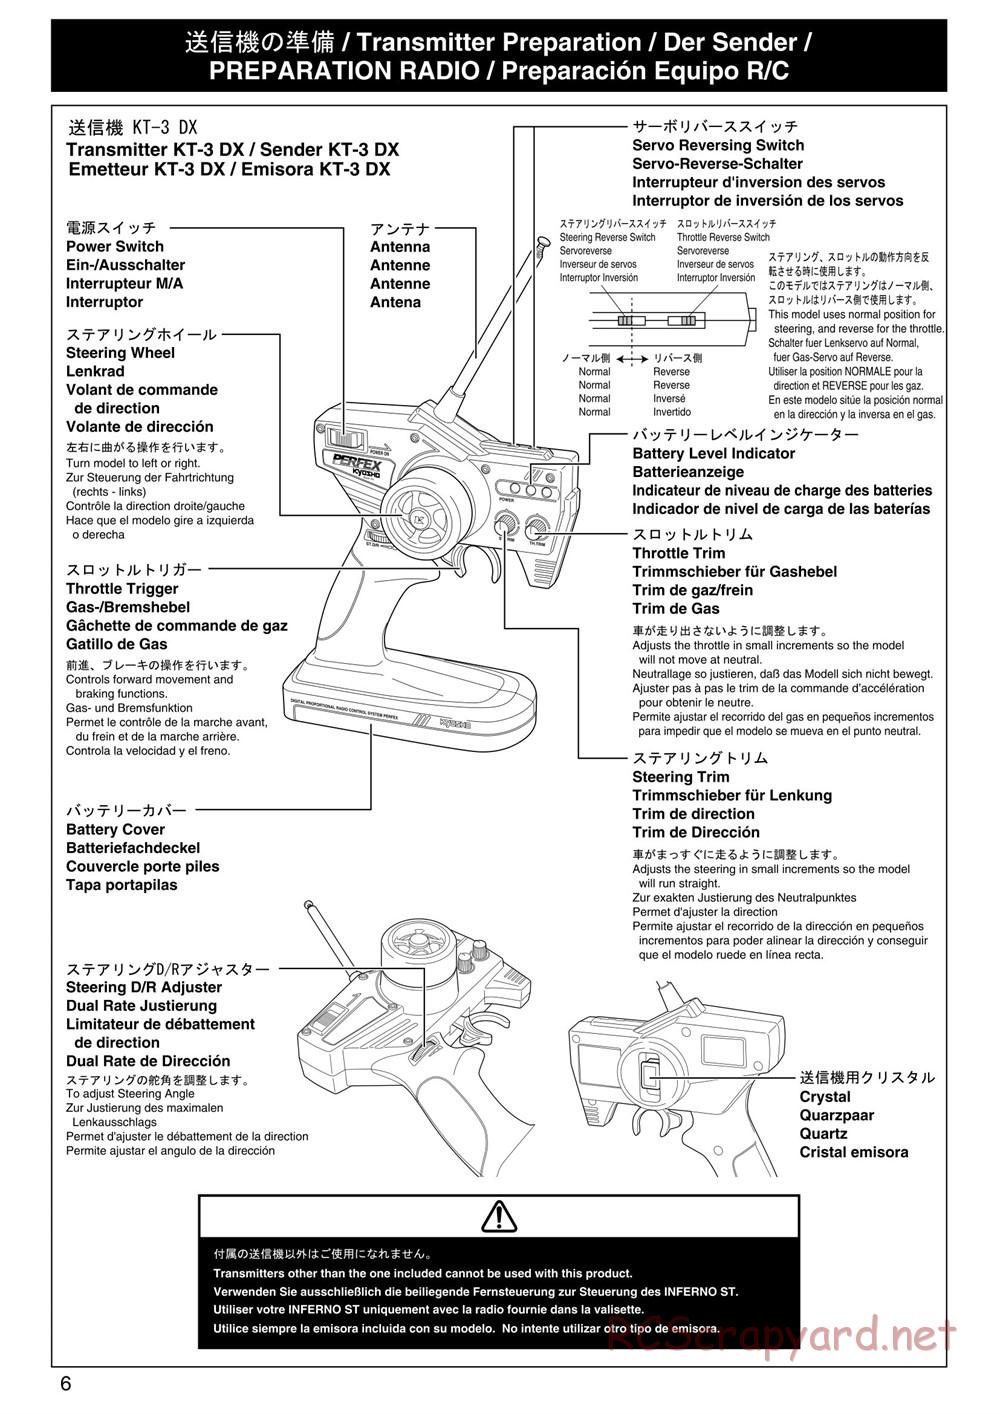 Kyosho - Inferno ST (2005) - Manual - Page 6